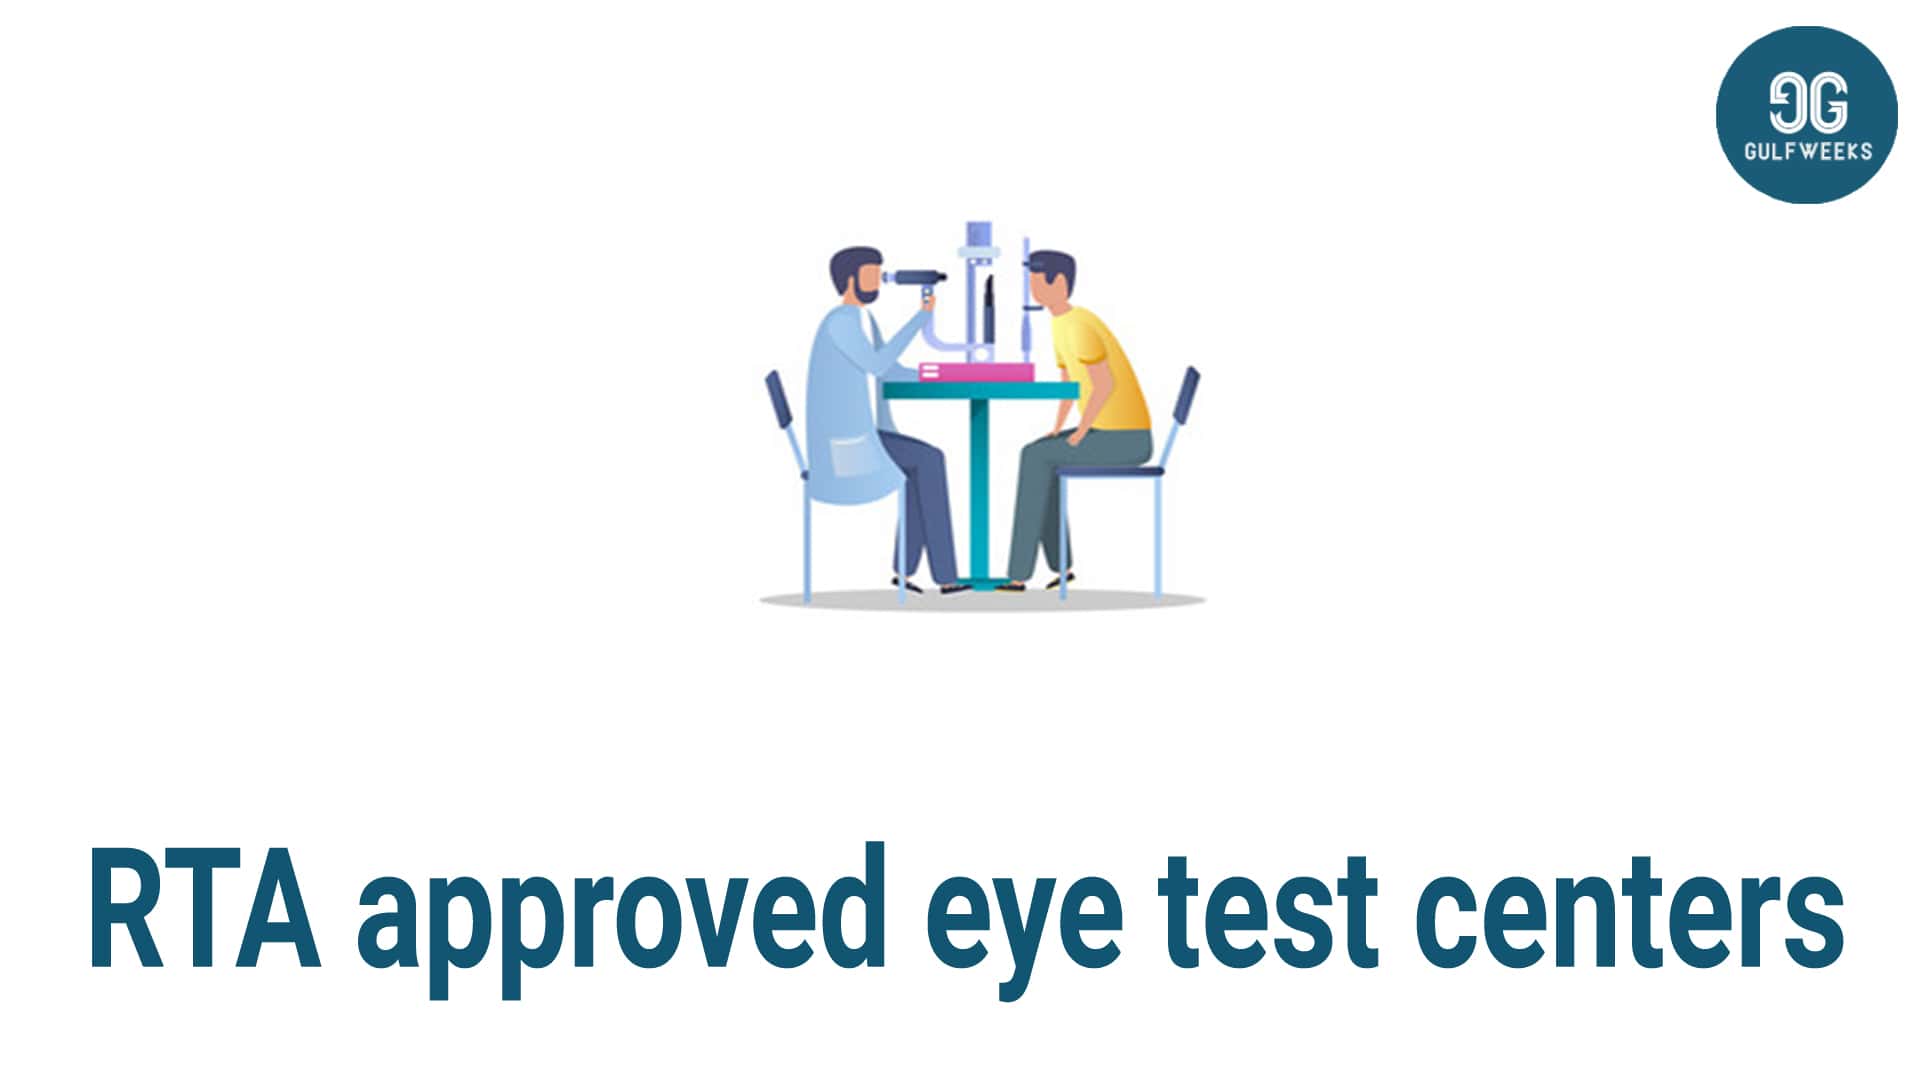 RTA approved eye test centers